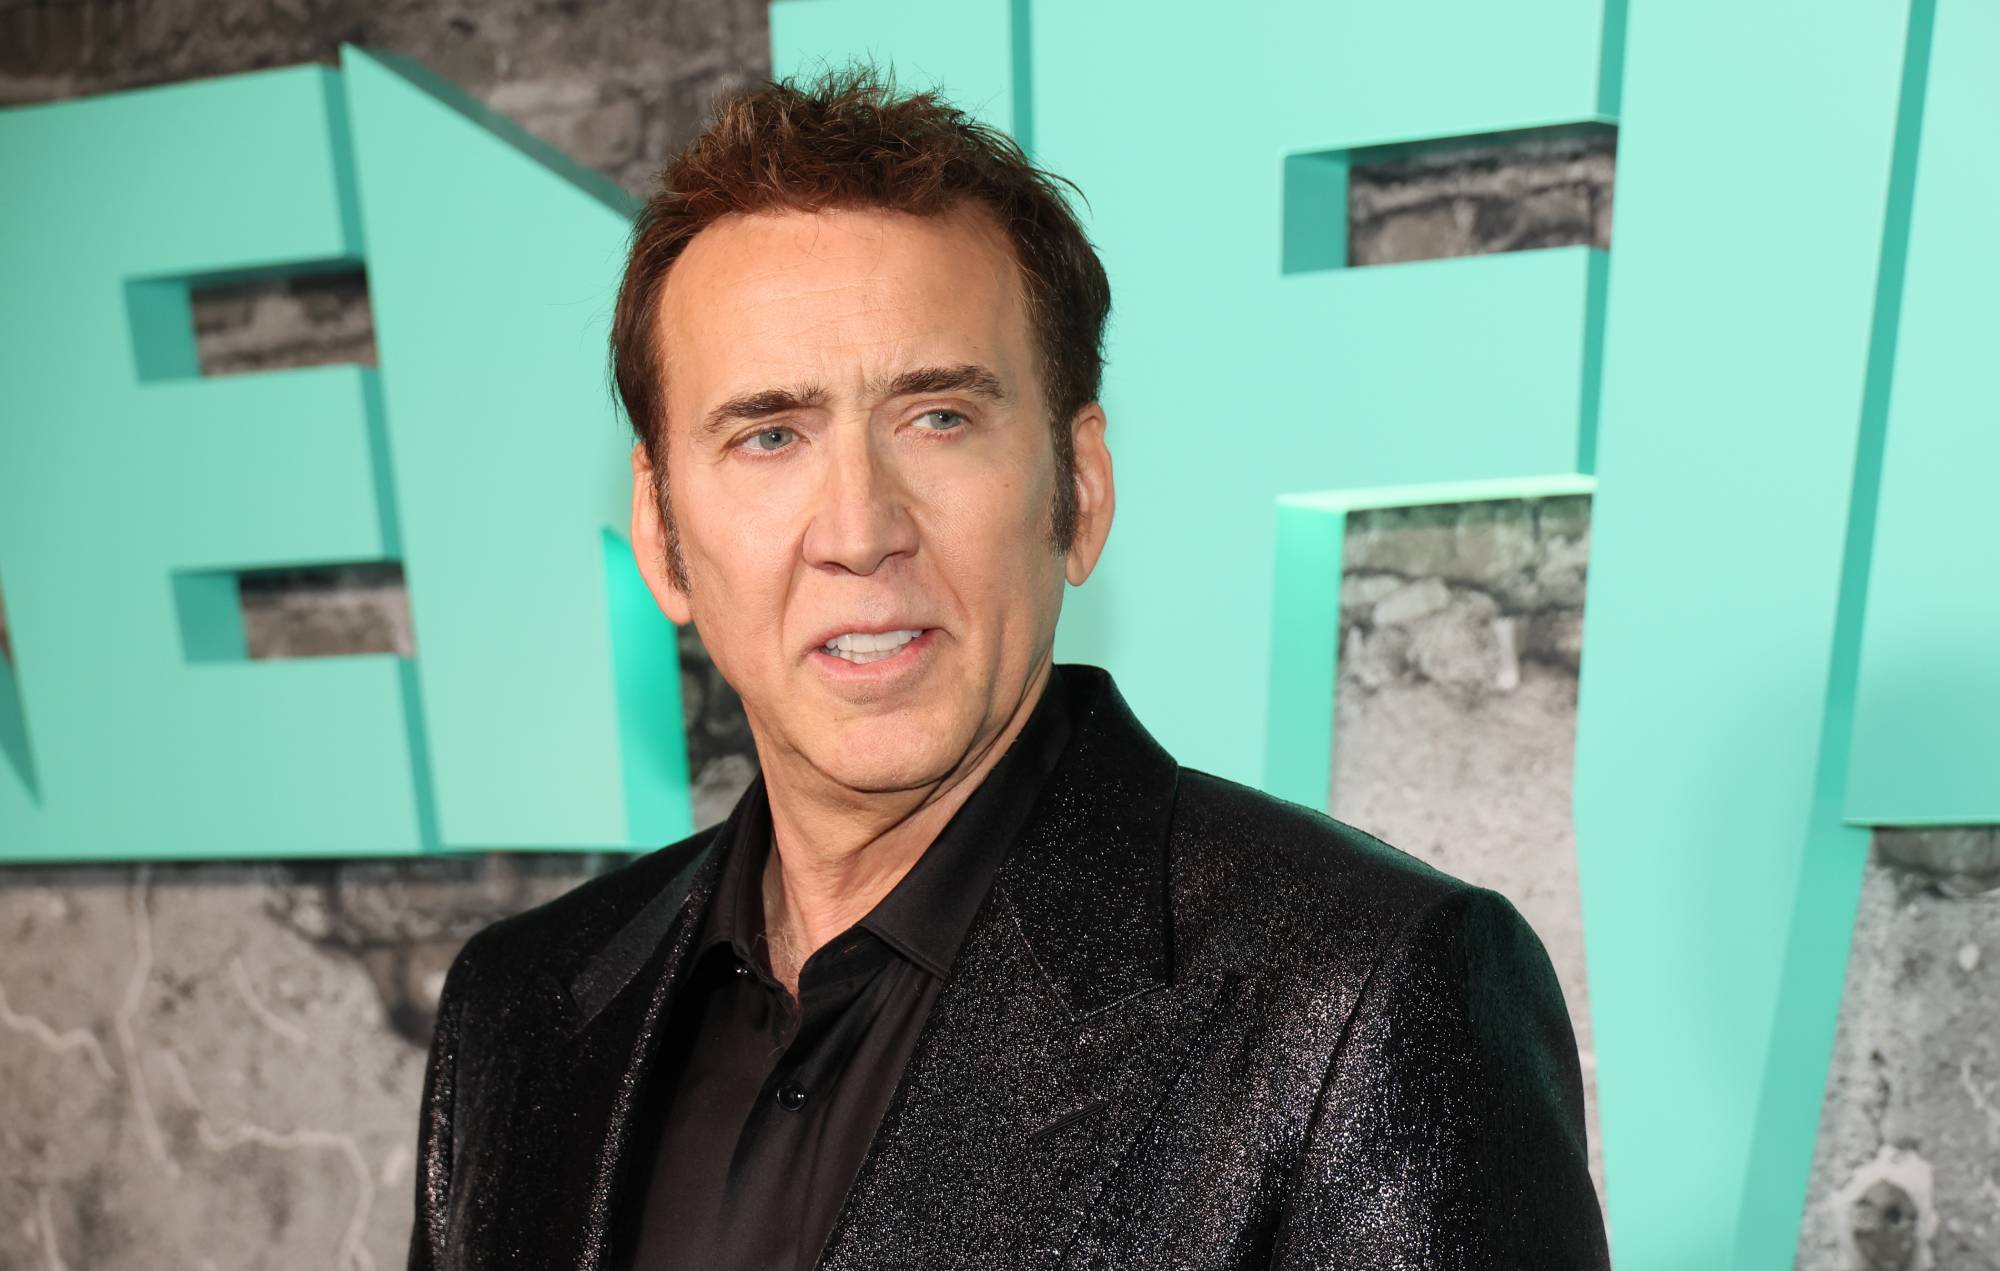 Nicolas Cage opens up about times where “fame turned on him”